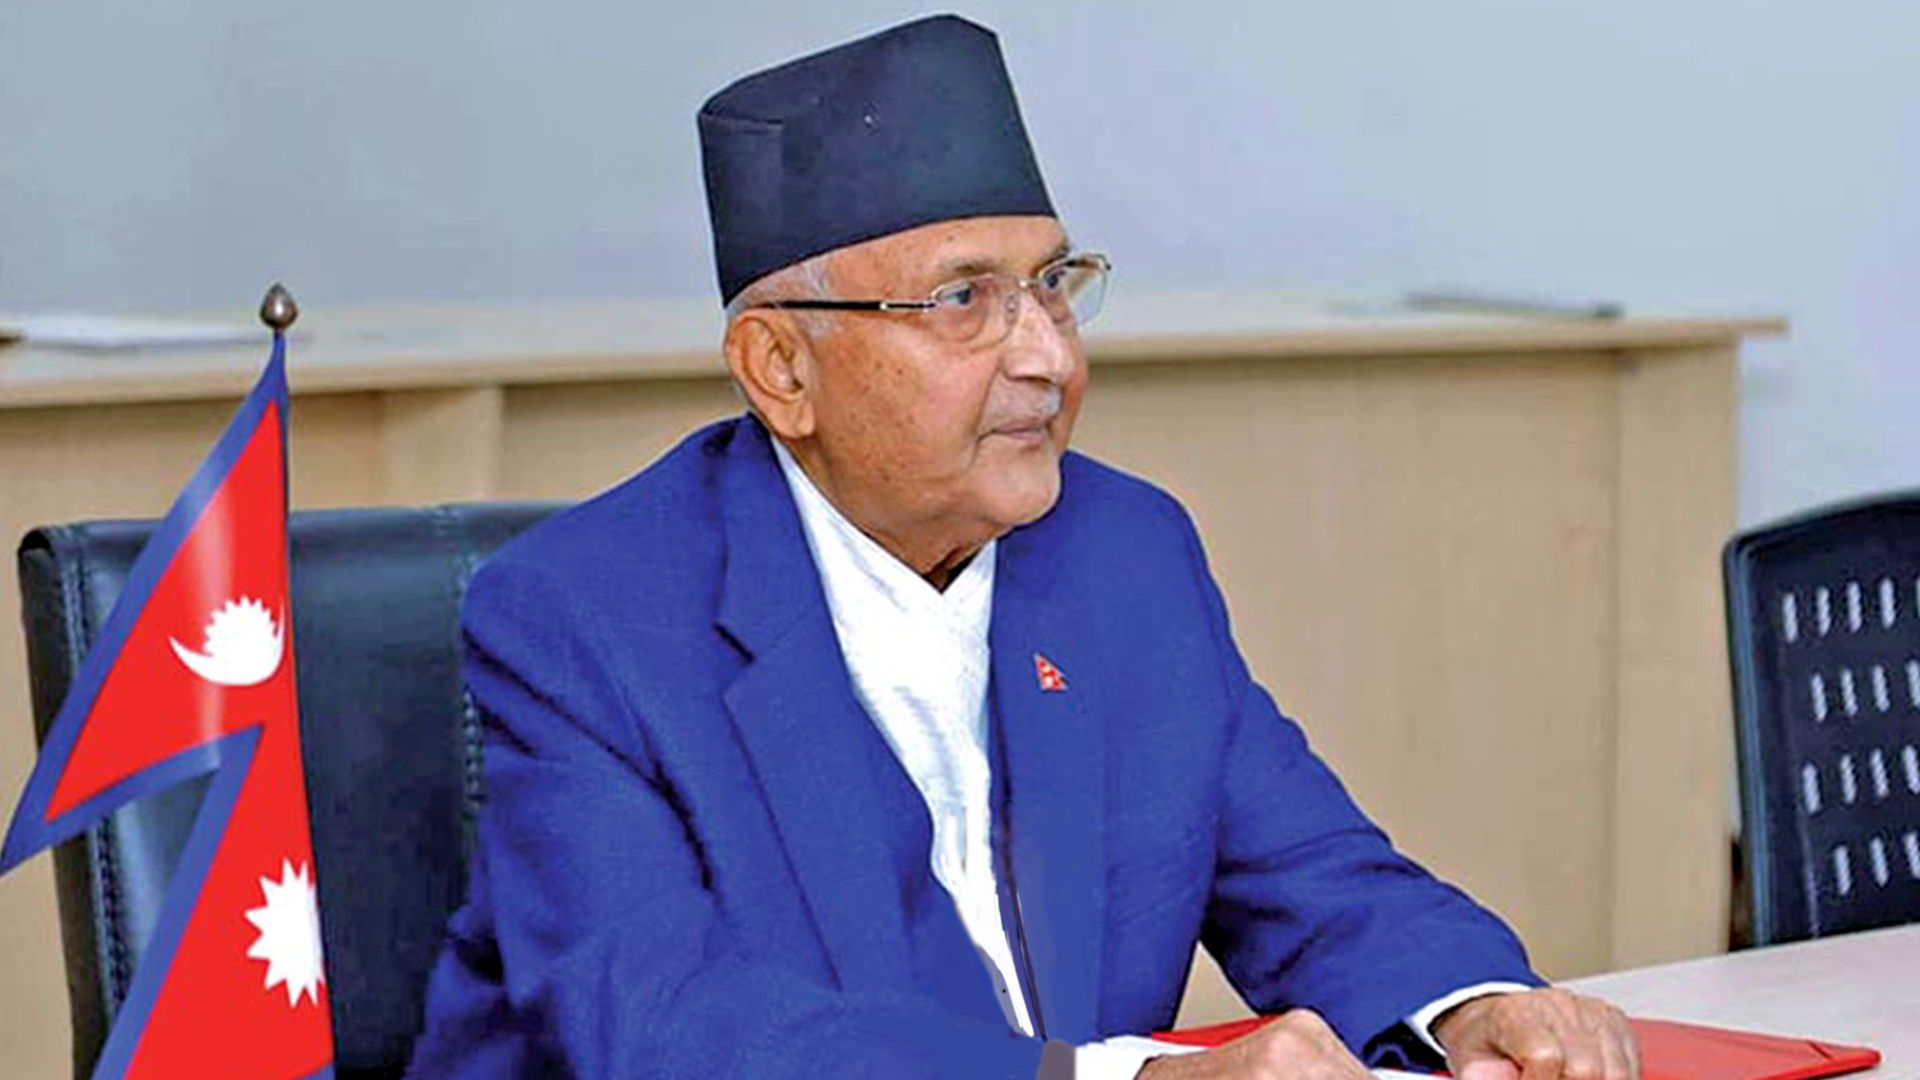 Corruption will not be tolerated: PM Oli